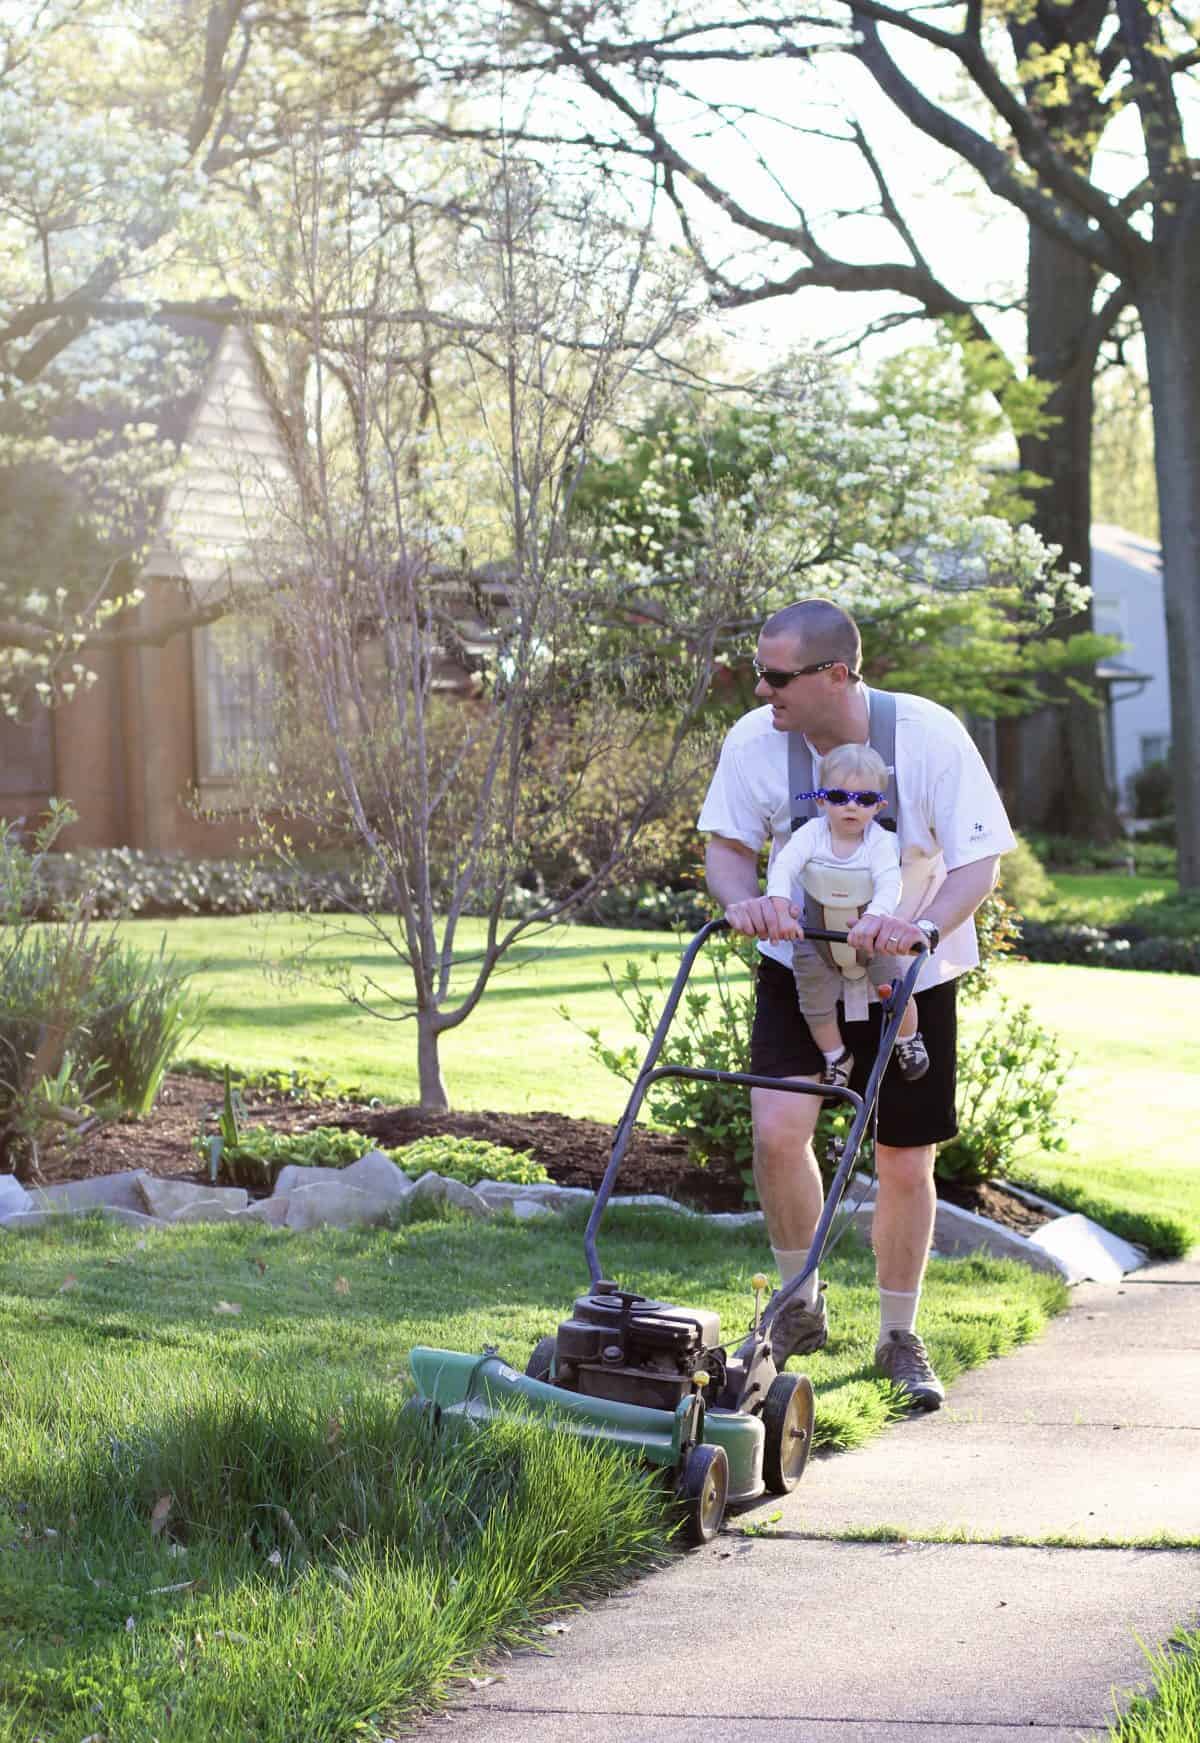 mowing the lawn with baby - protective eyewear for babies